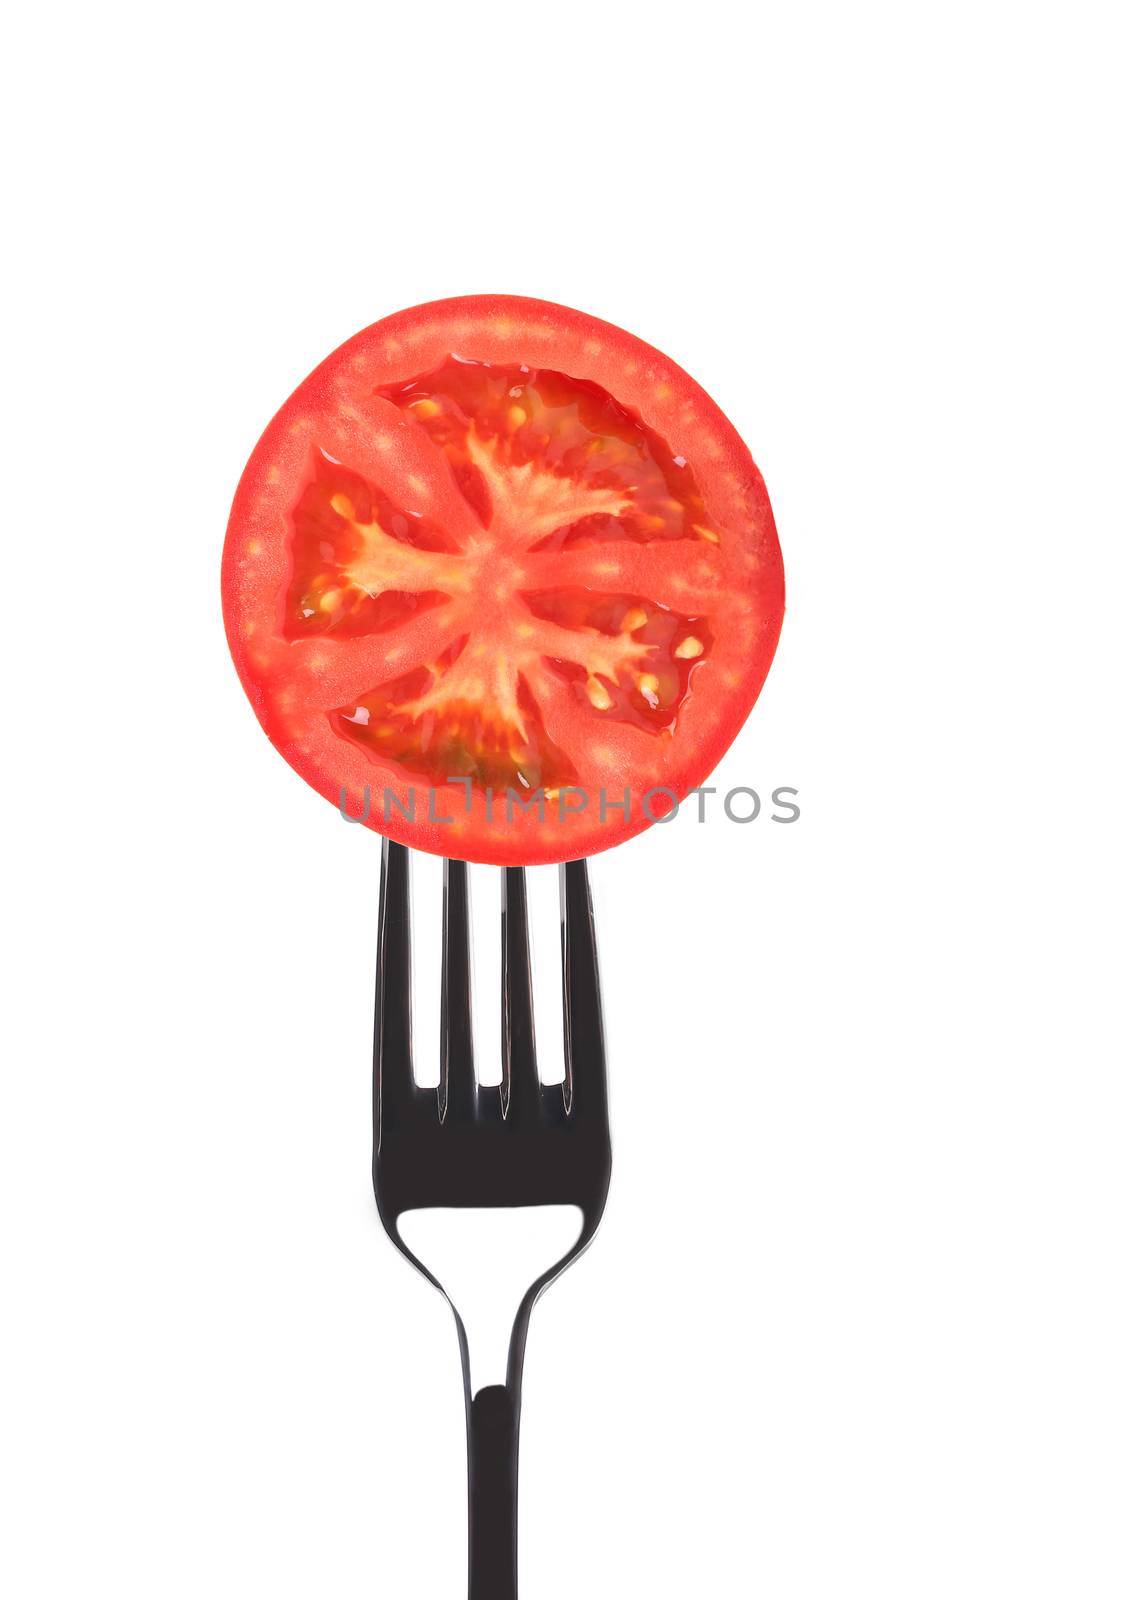 Red juicy tomato on fork. Isolated on a white background.